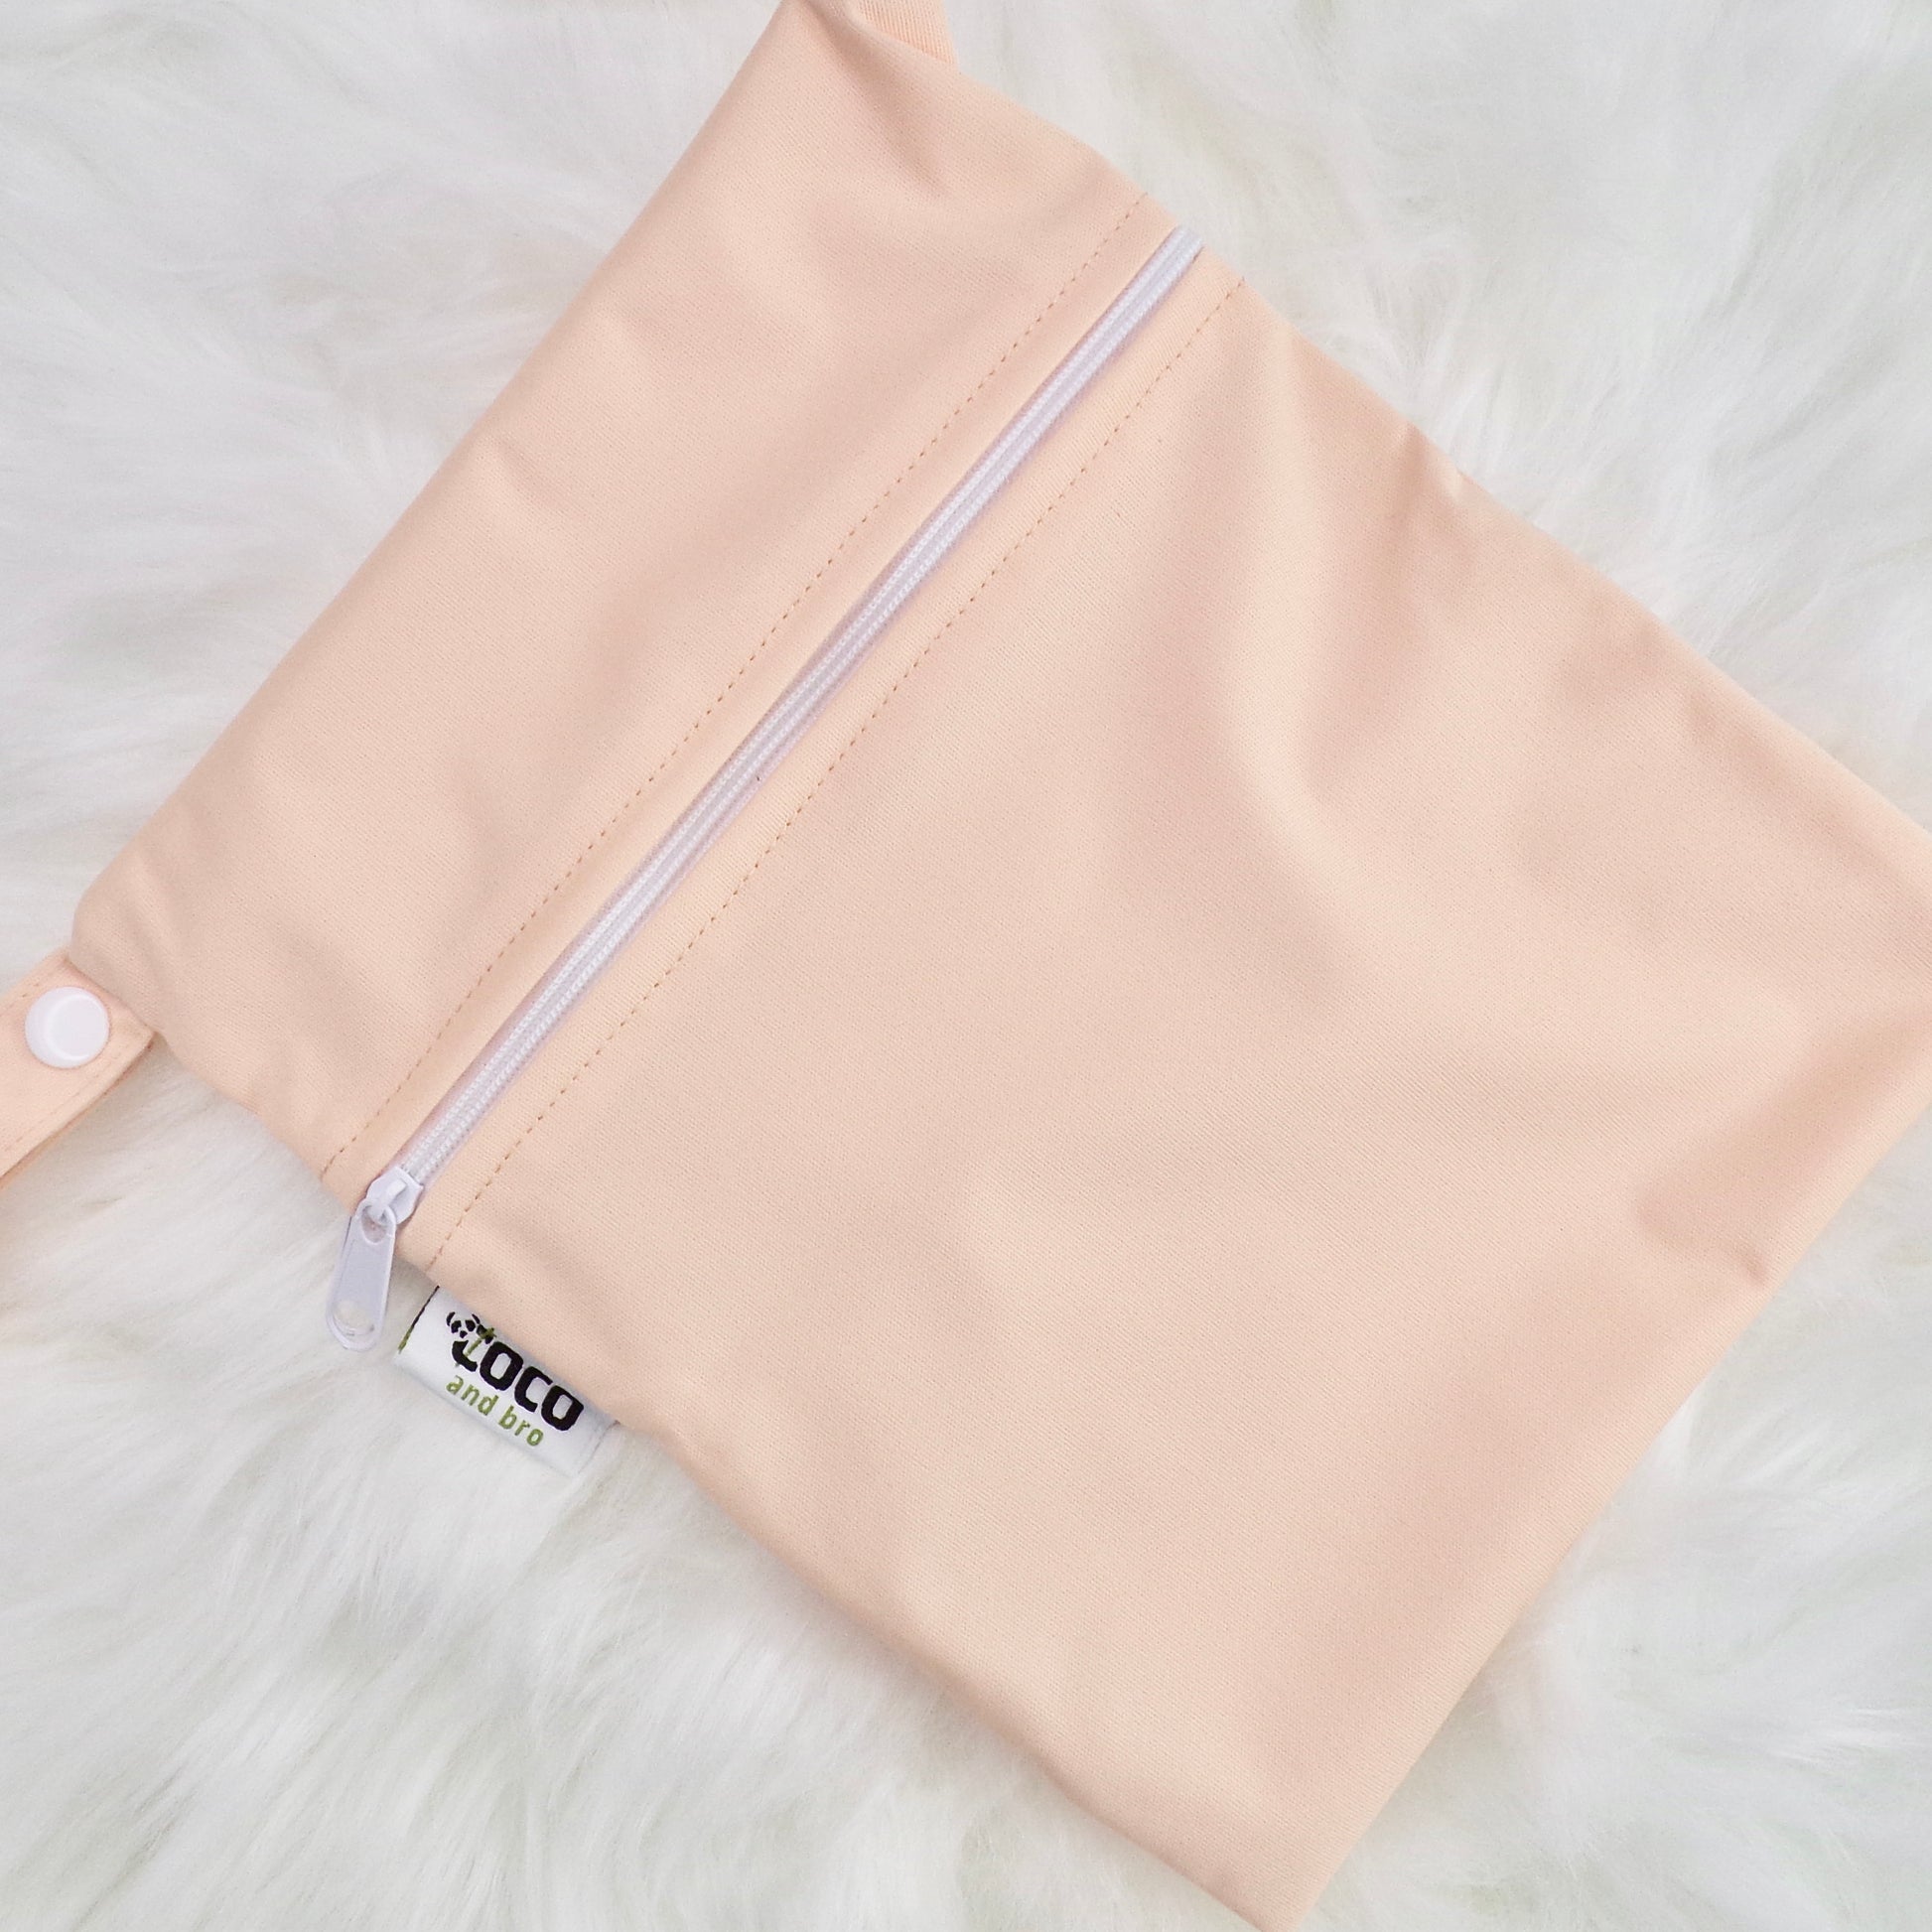 This image shows a waterproof bag in peachy pink, with a zip closure.